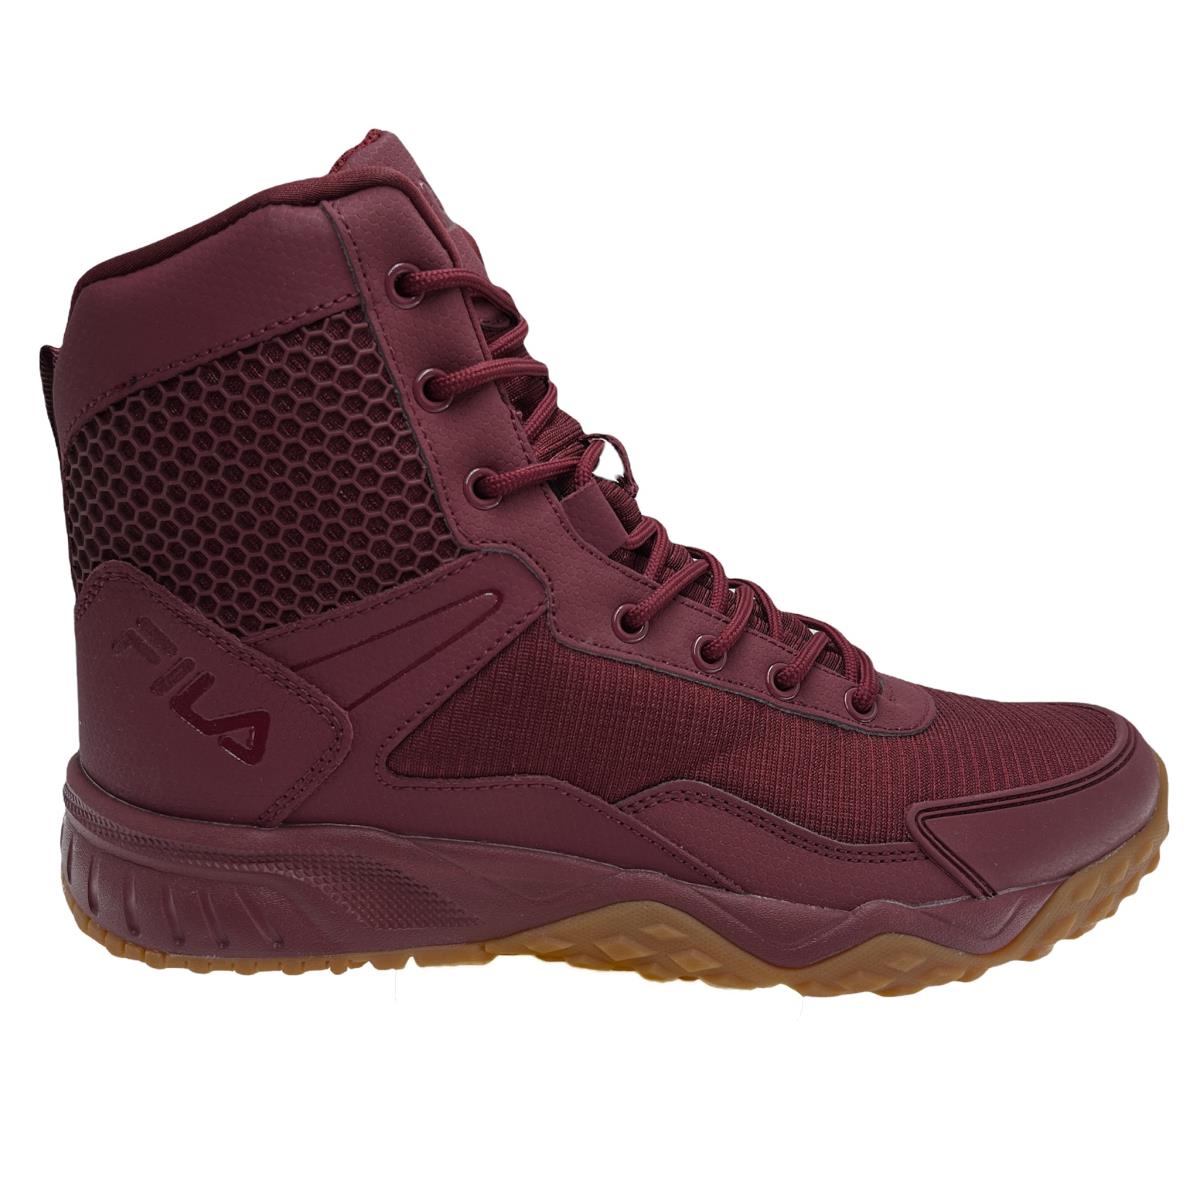 Fila Men`s Chastizer Tactical High Top Casual Fashion Combat Work Shoes Boots Tawny Port/Gum